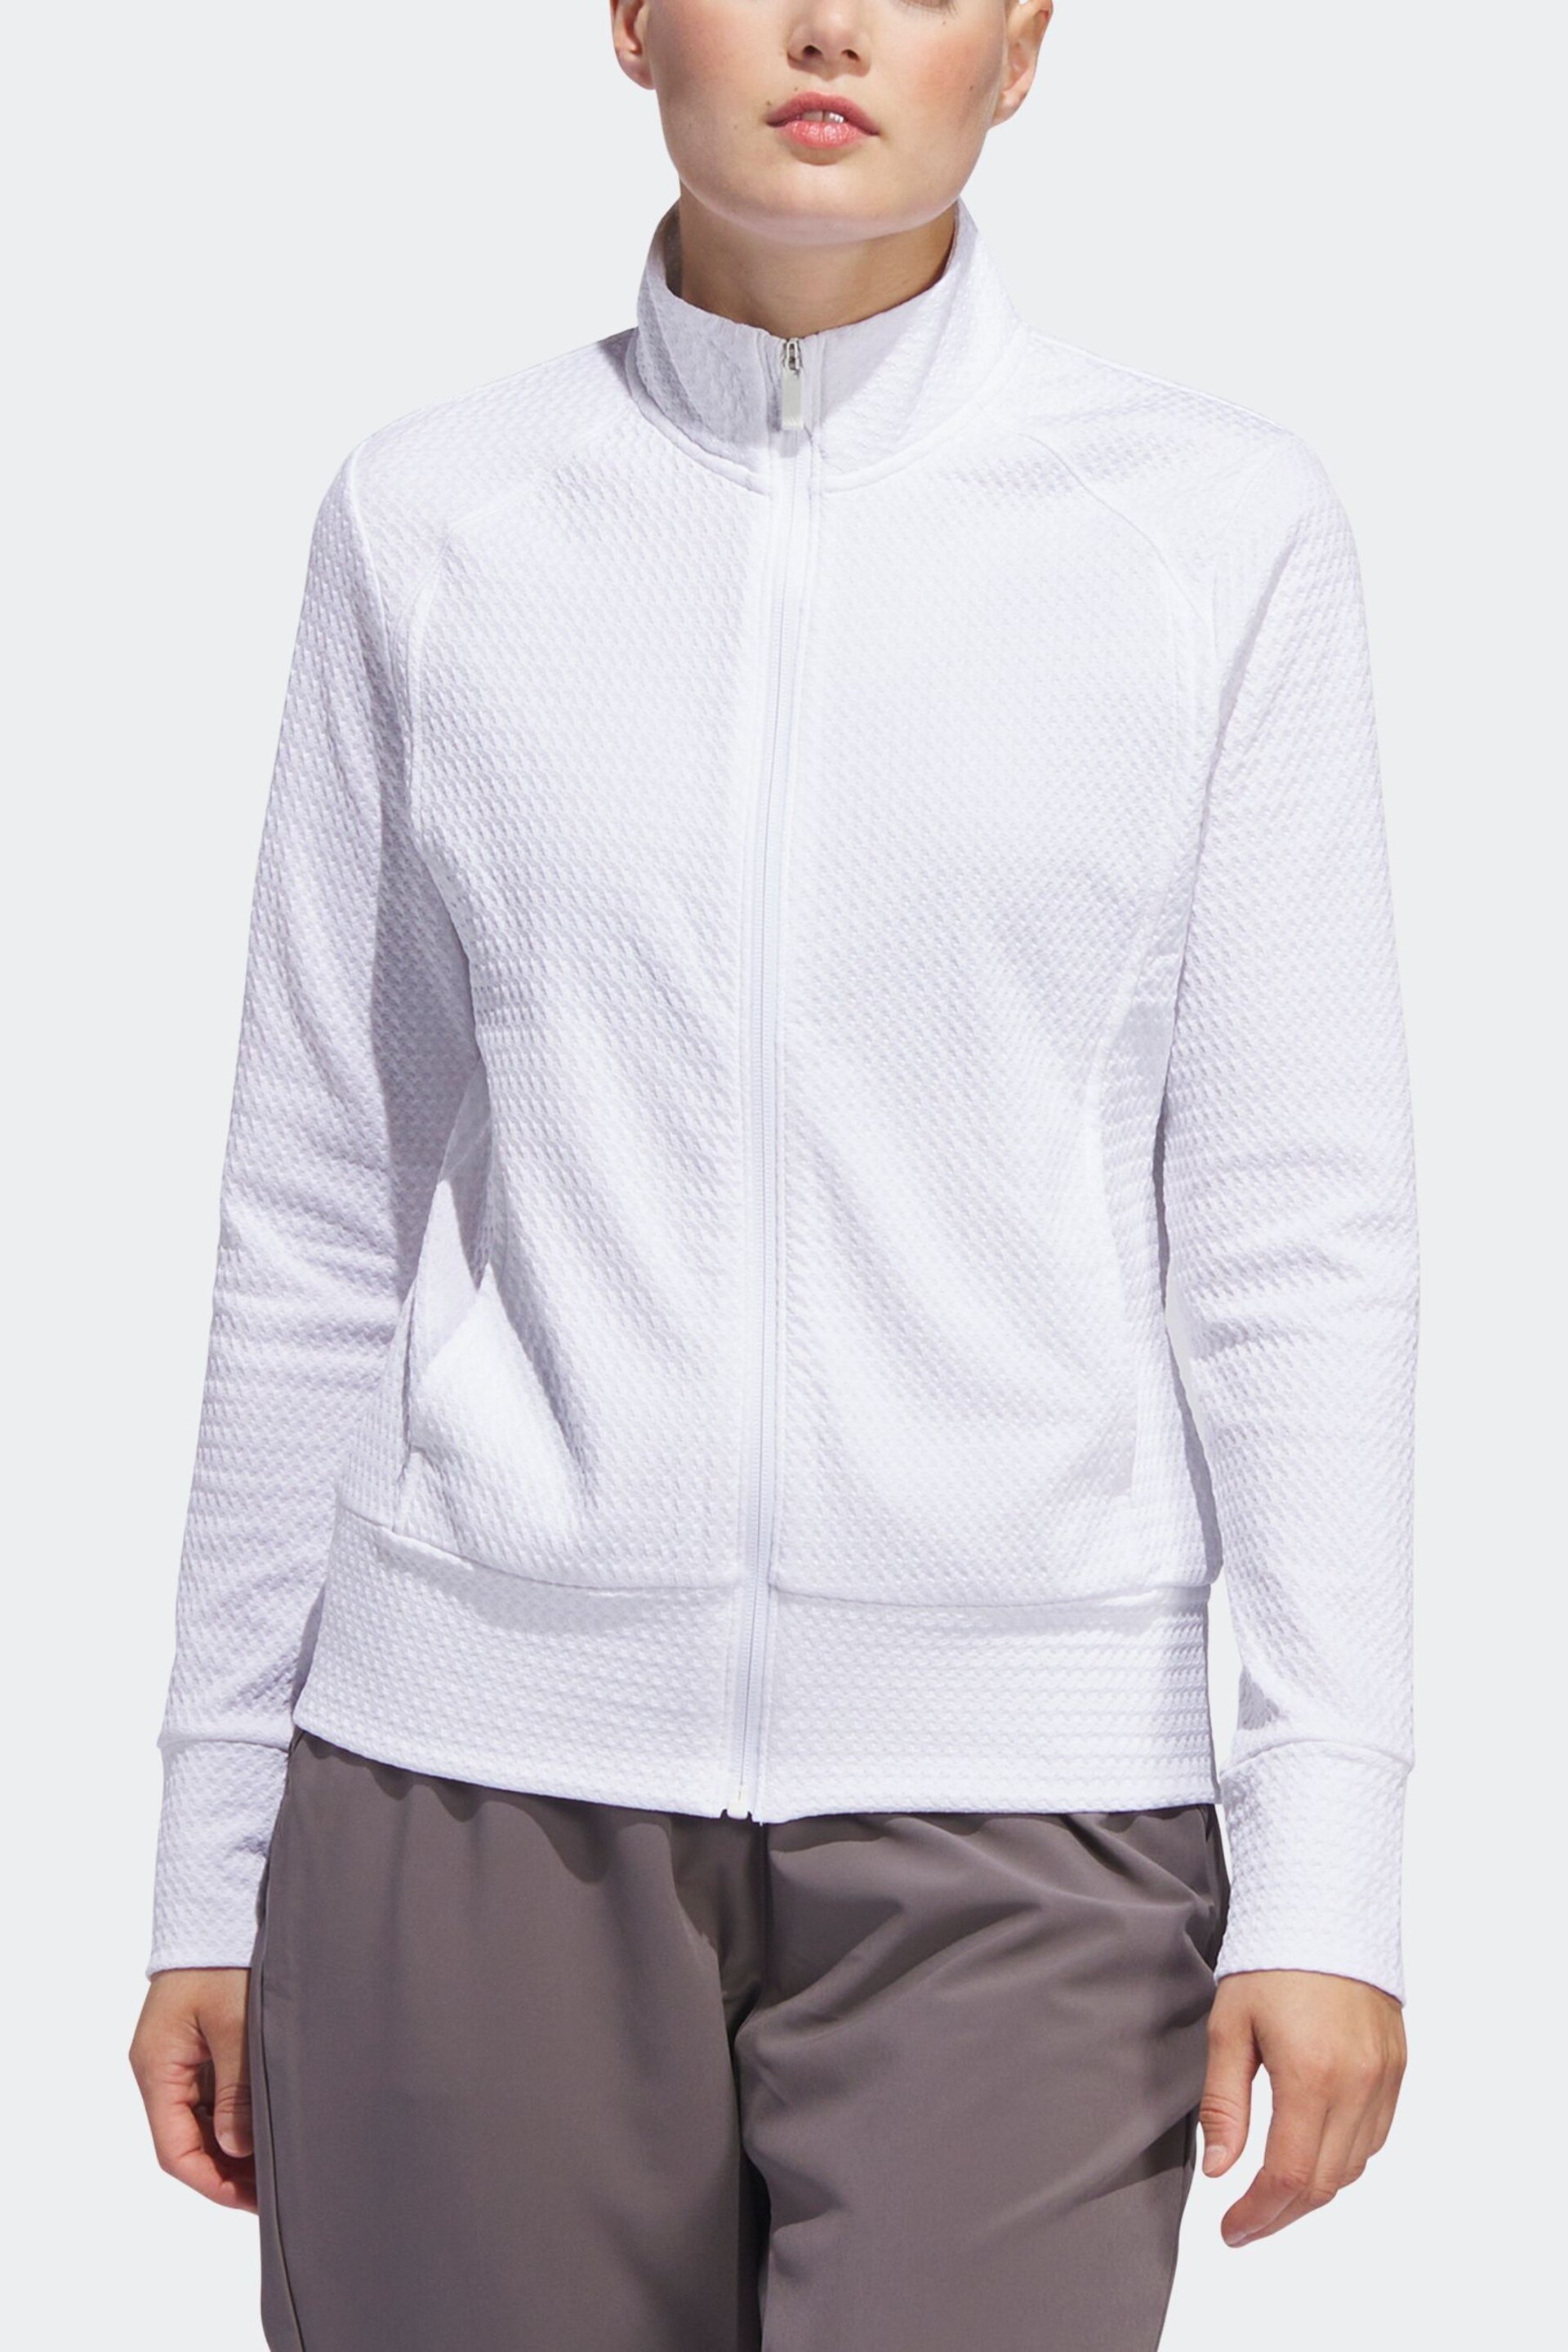 adidas Golf Womens Ultimate365 Textured Jacket - Image 1 of 6